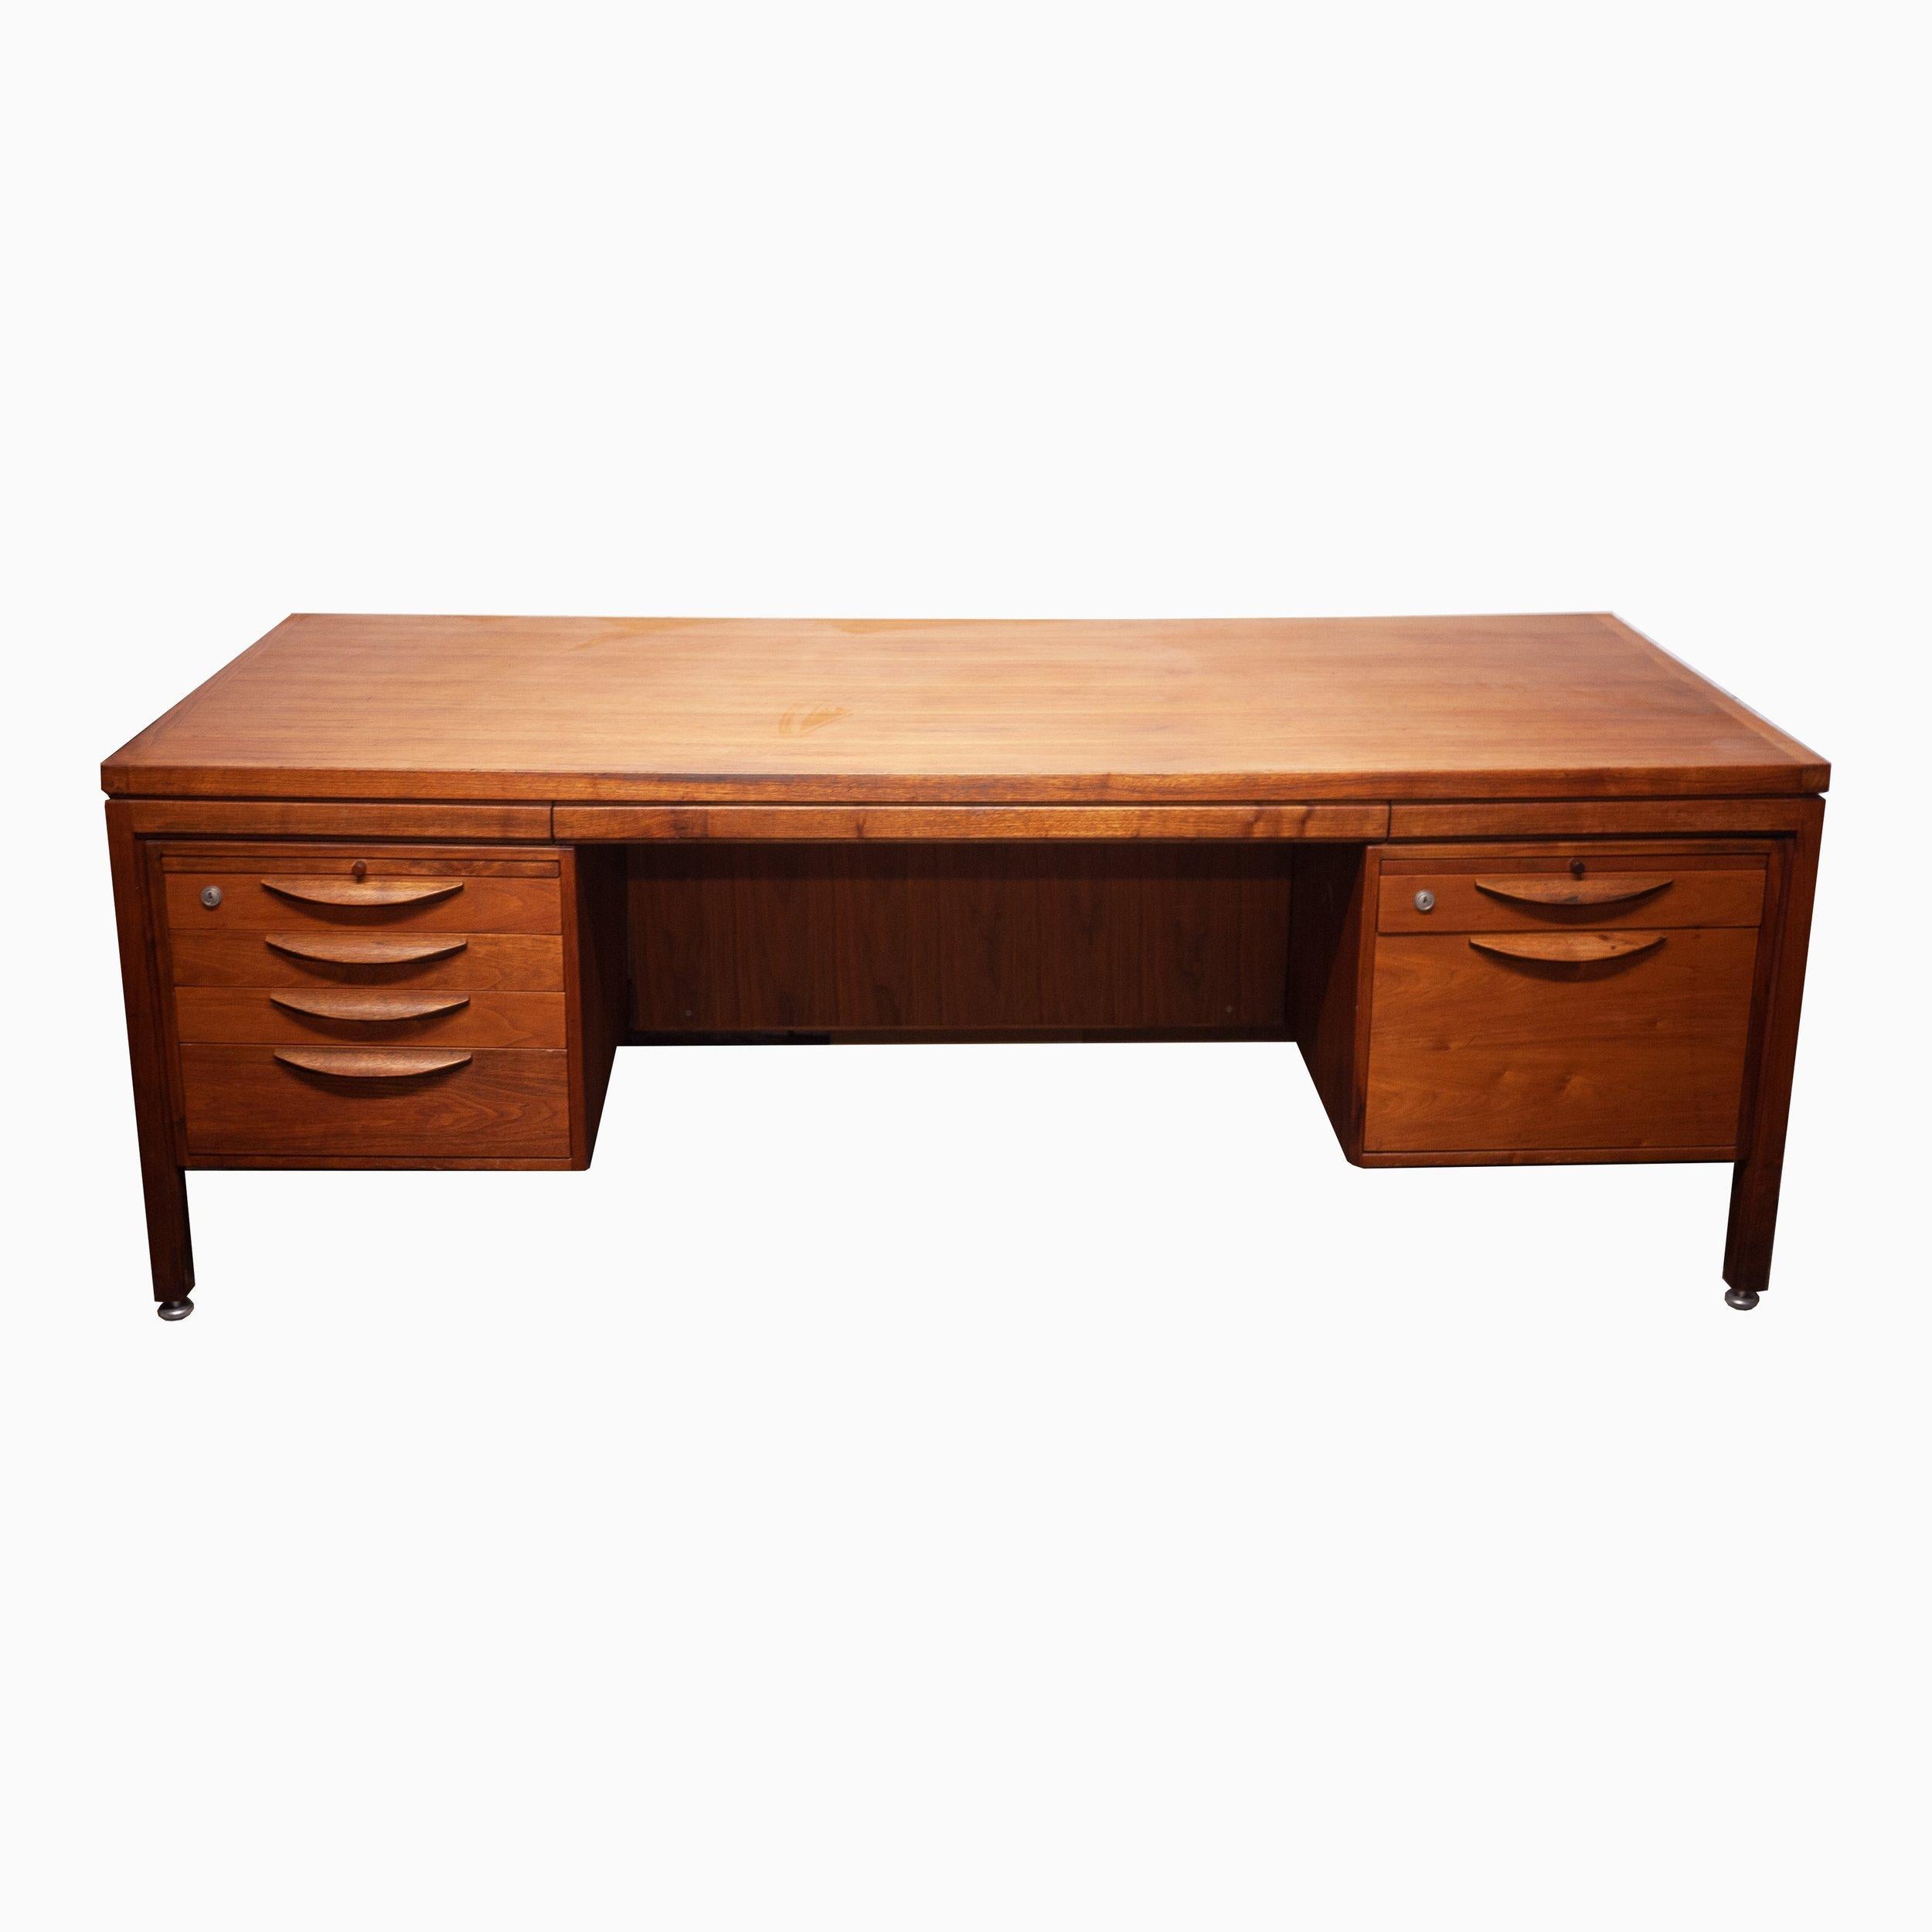 Mid-20th Century Large Executive Walnut Writing Desk by Jens Risom, 1960s For Sale